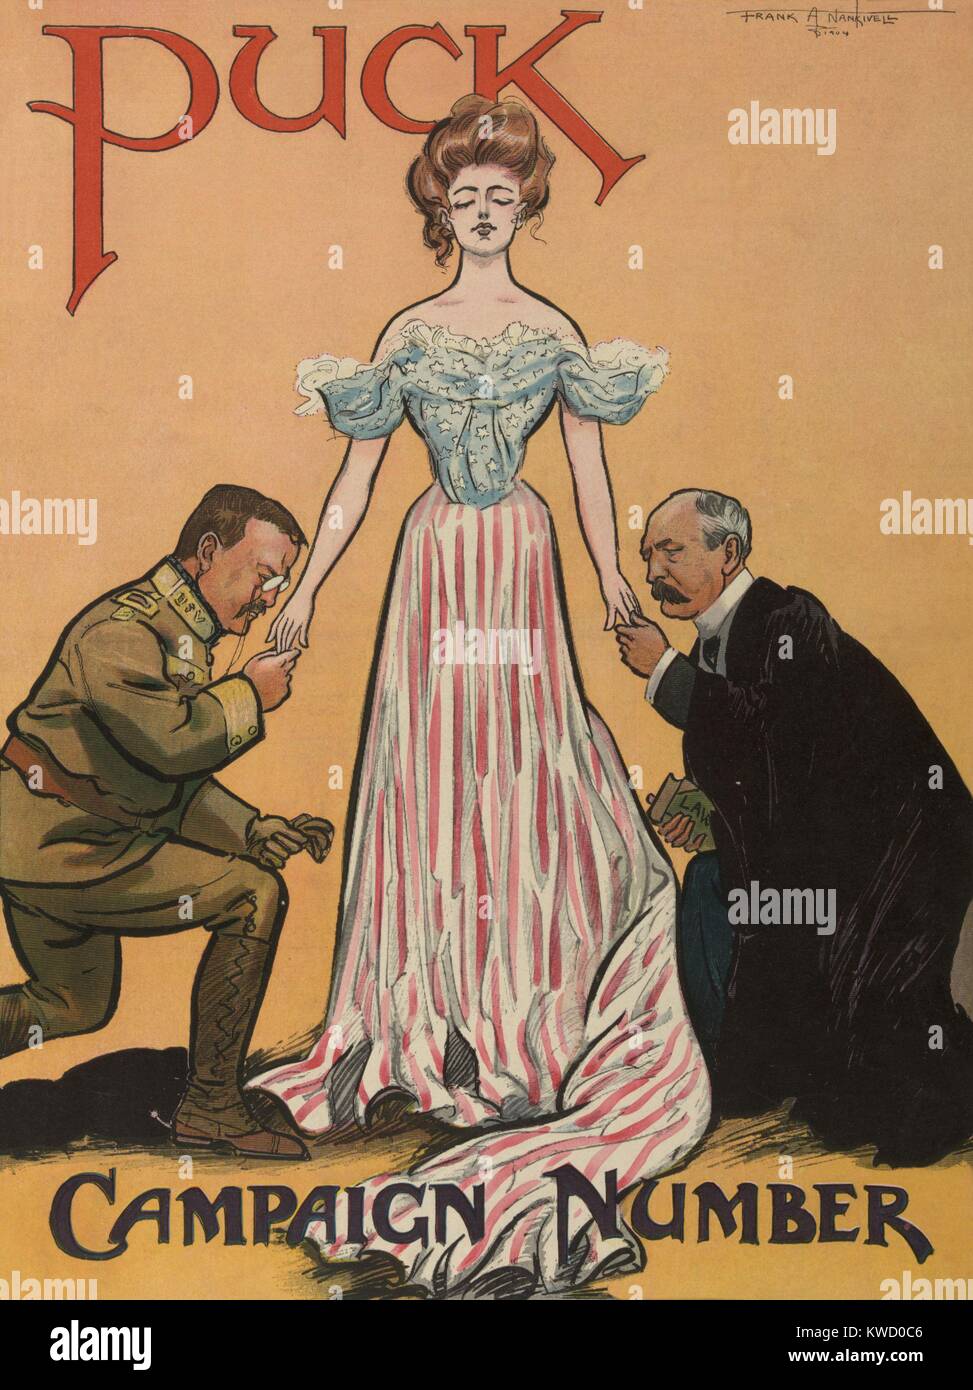 PUCK Magazine cover about the 1904 US Presidential election. It shows Columbia standing between kneeling President Theodore Roosevelt and Democratic challenger, Alton B. Parker, each about to kiss her hands. Roosevelt won with 56% of the popular vote, and Parker lost the election, winning only the Southern states (BSLOC 2017 6 29) Stock Photo